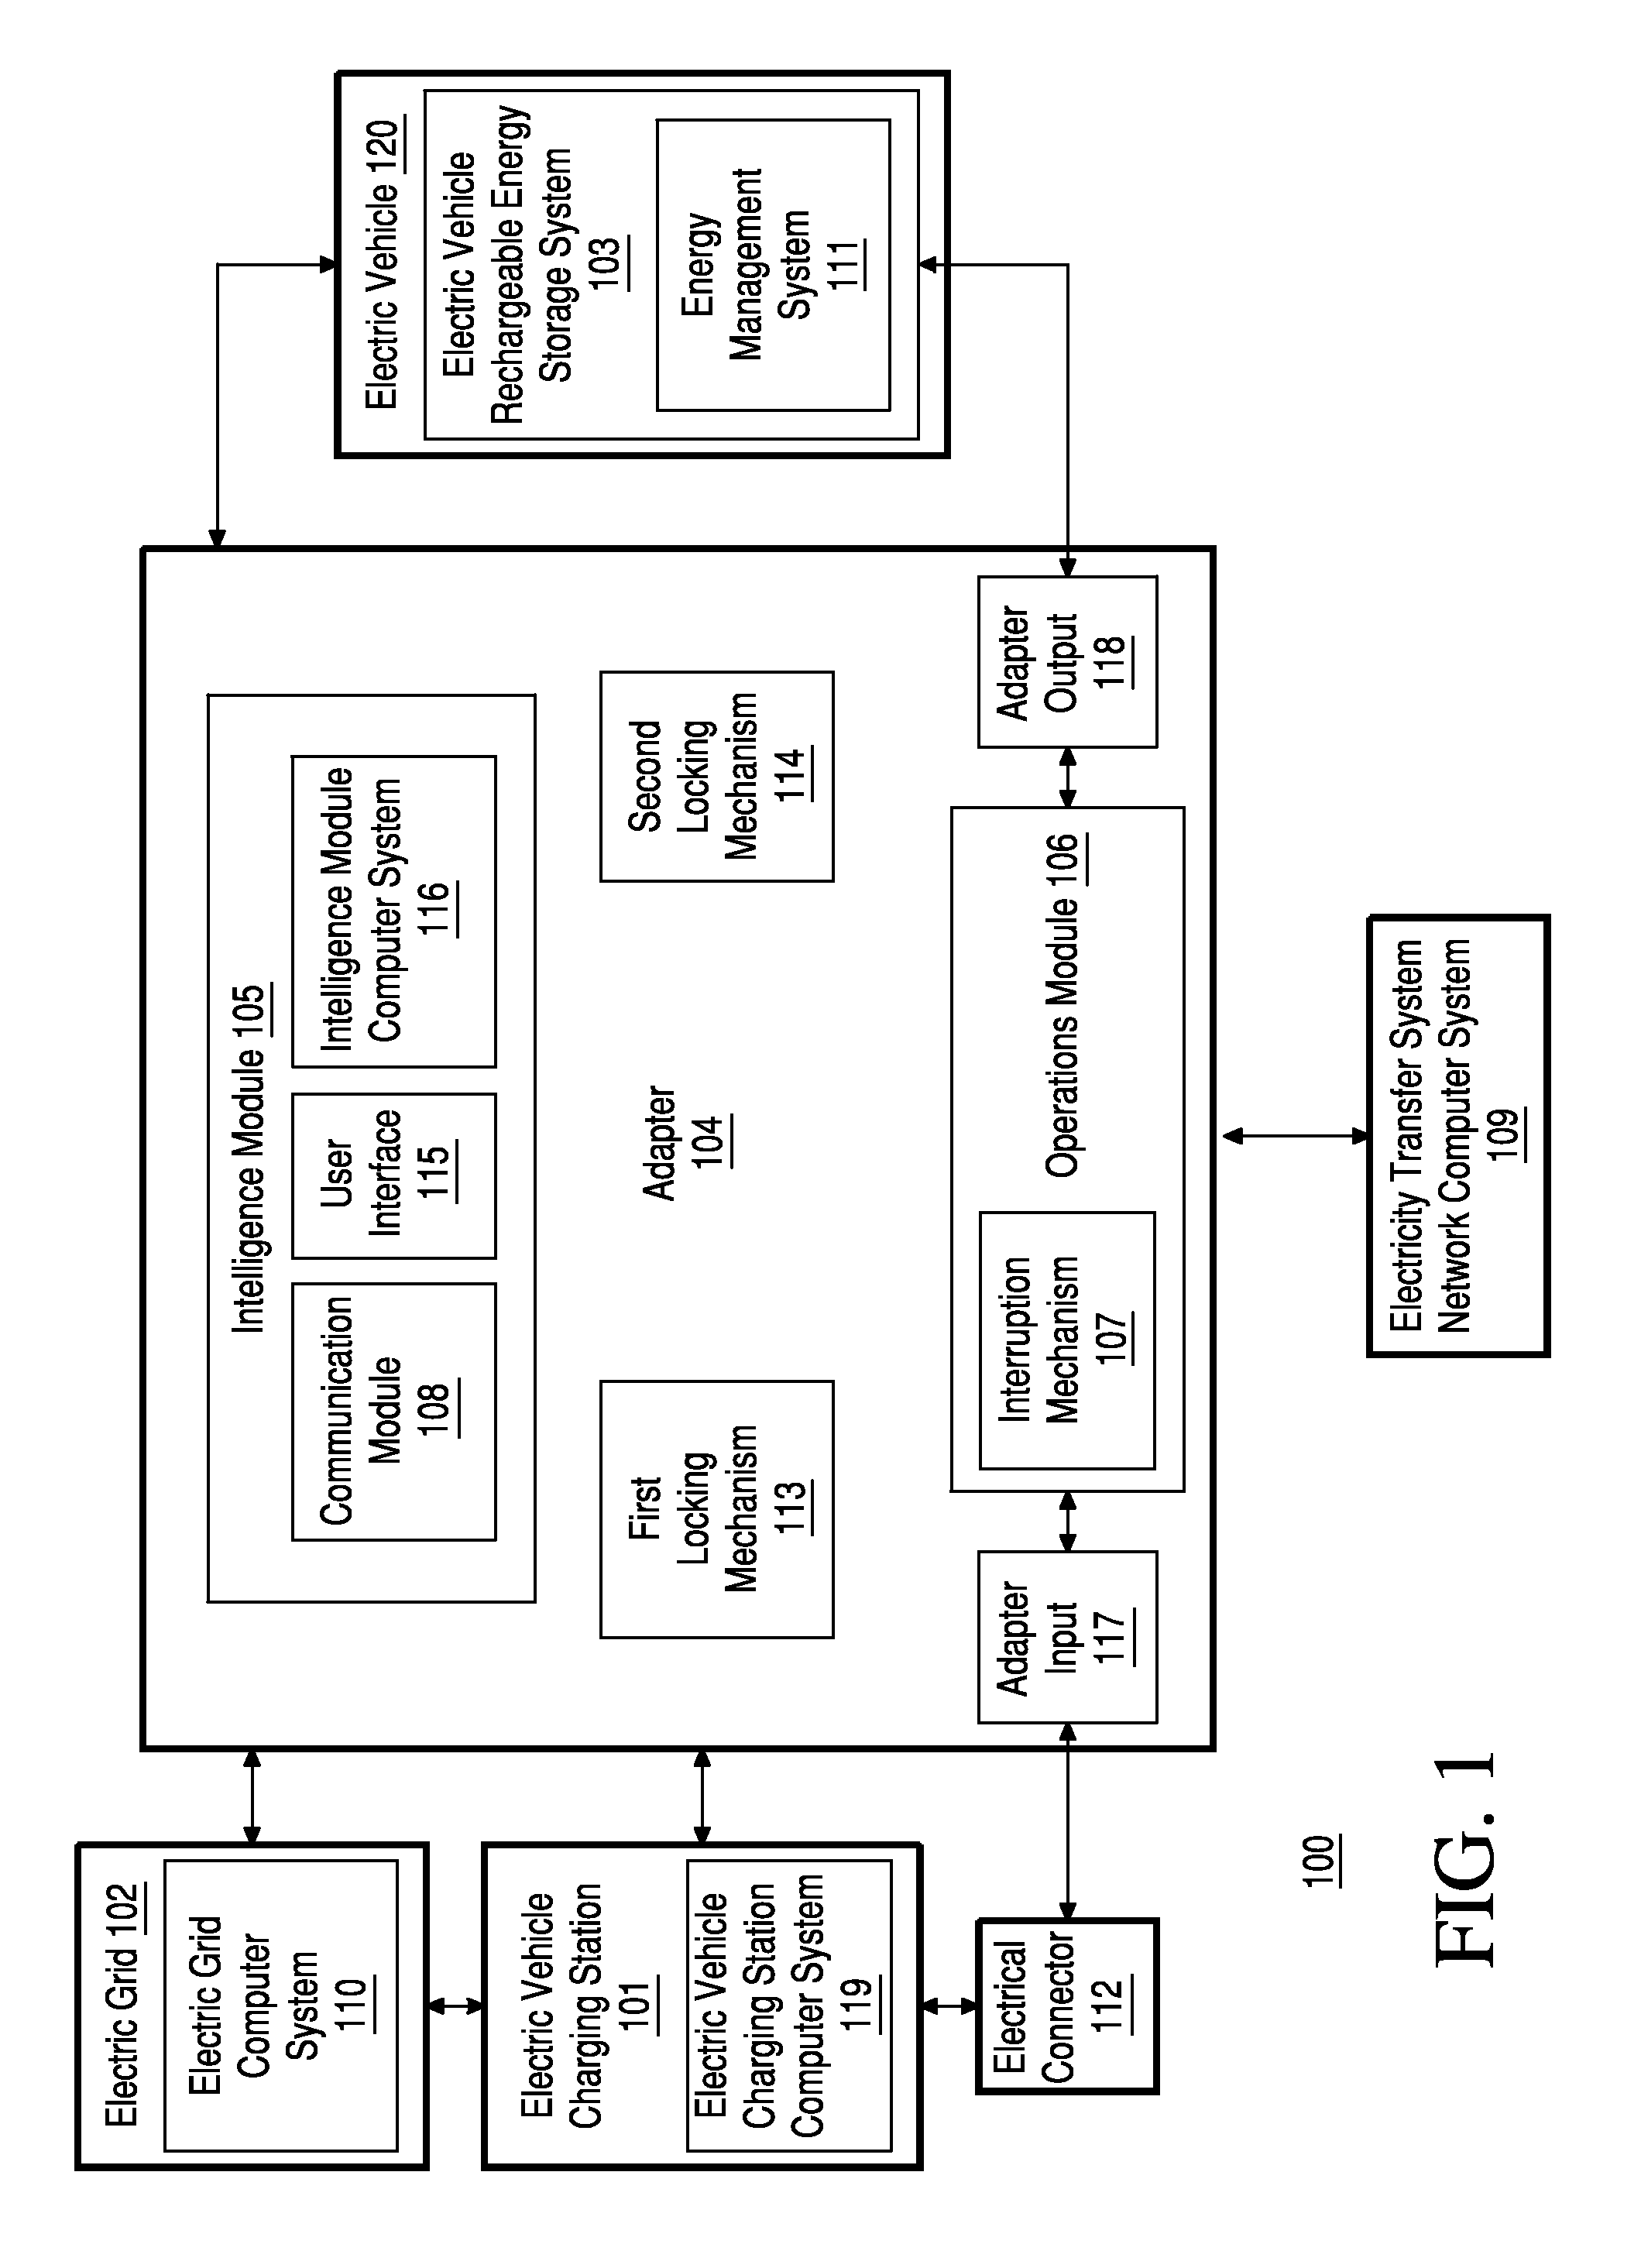 Electricity transfer system for modifying an electric vehicle charging station and method of providing, using, and supporting the same